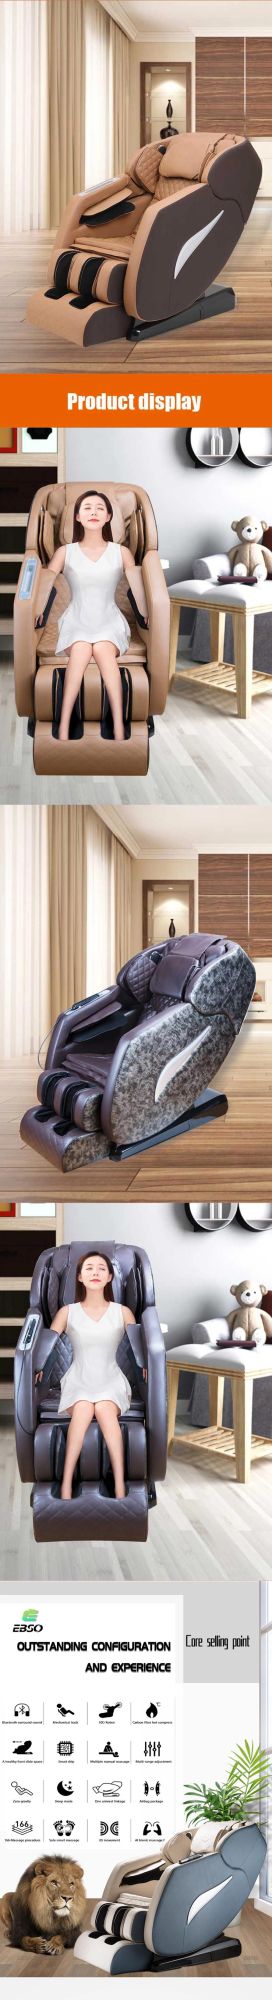 Electric Heating Vibratory Massage Chair Cheap Full Body Massage Chair for Sale